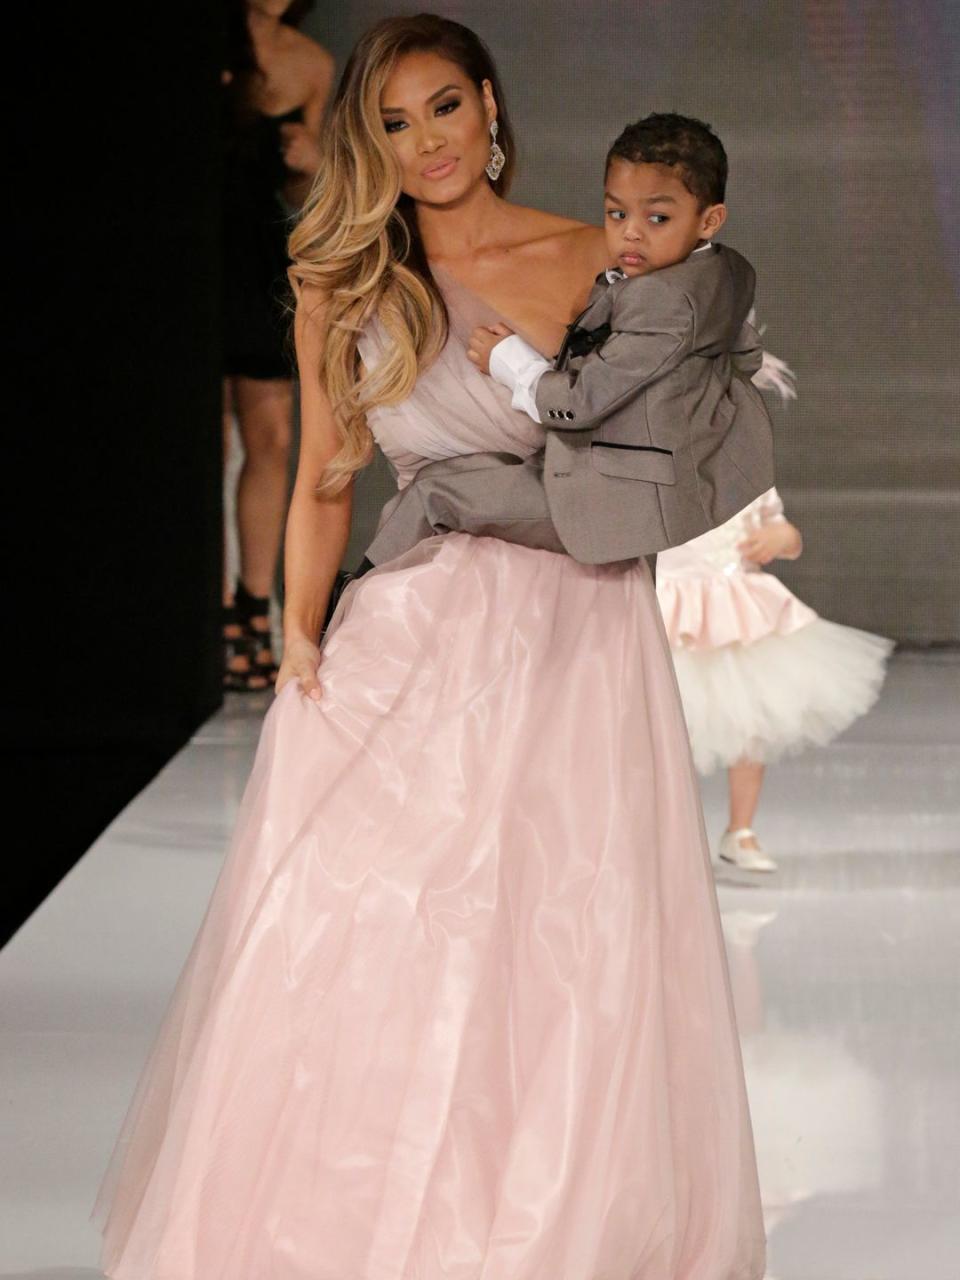 Model Daphne Joy carrying her son, Sire Jackson fathered by former rapper 50cent in the Isabella Couture runway show